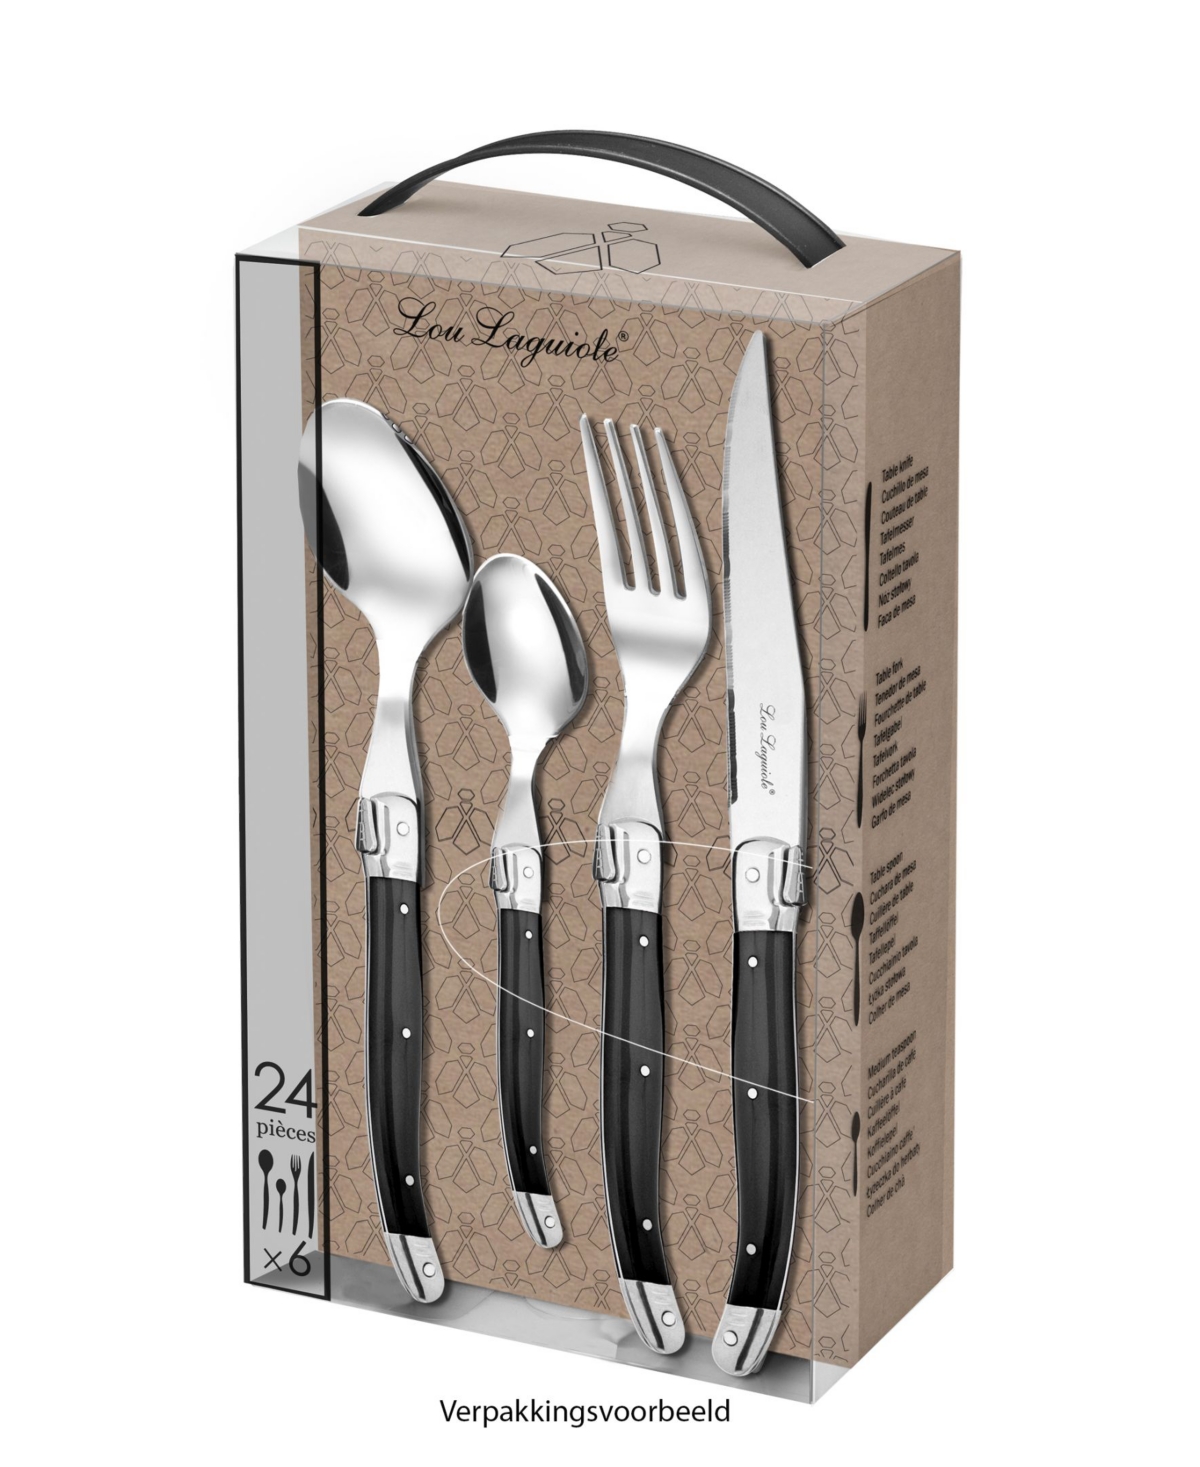 Lou Laguiole Tradition 24 Pieces Flatware Set In Silver-tone,anthracite